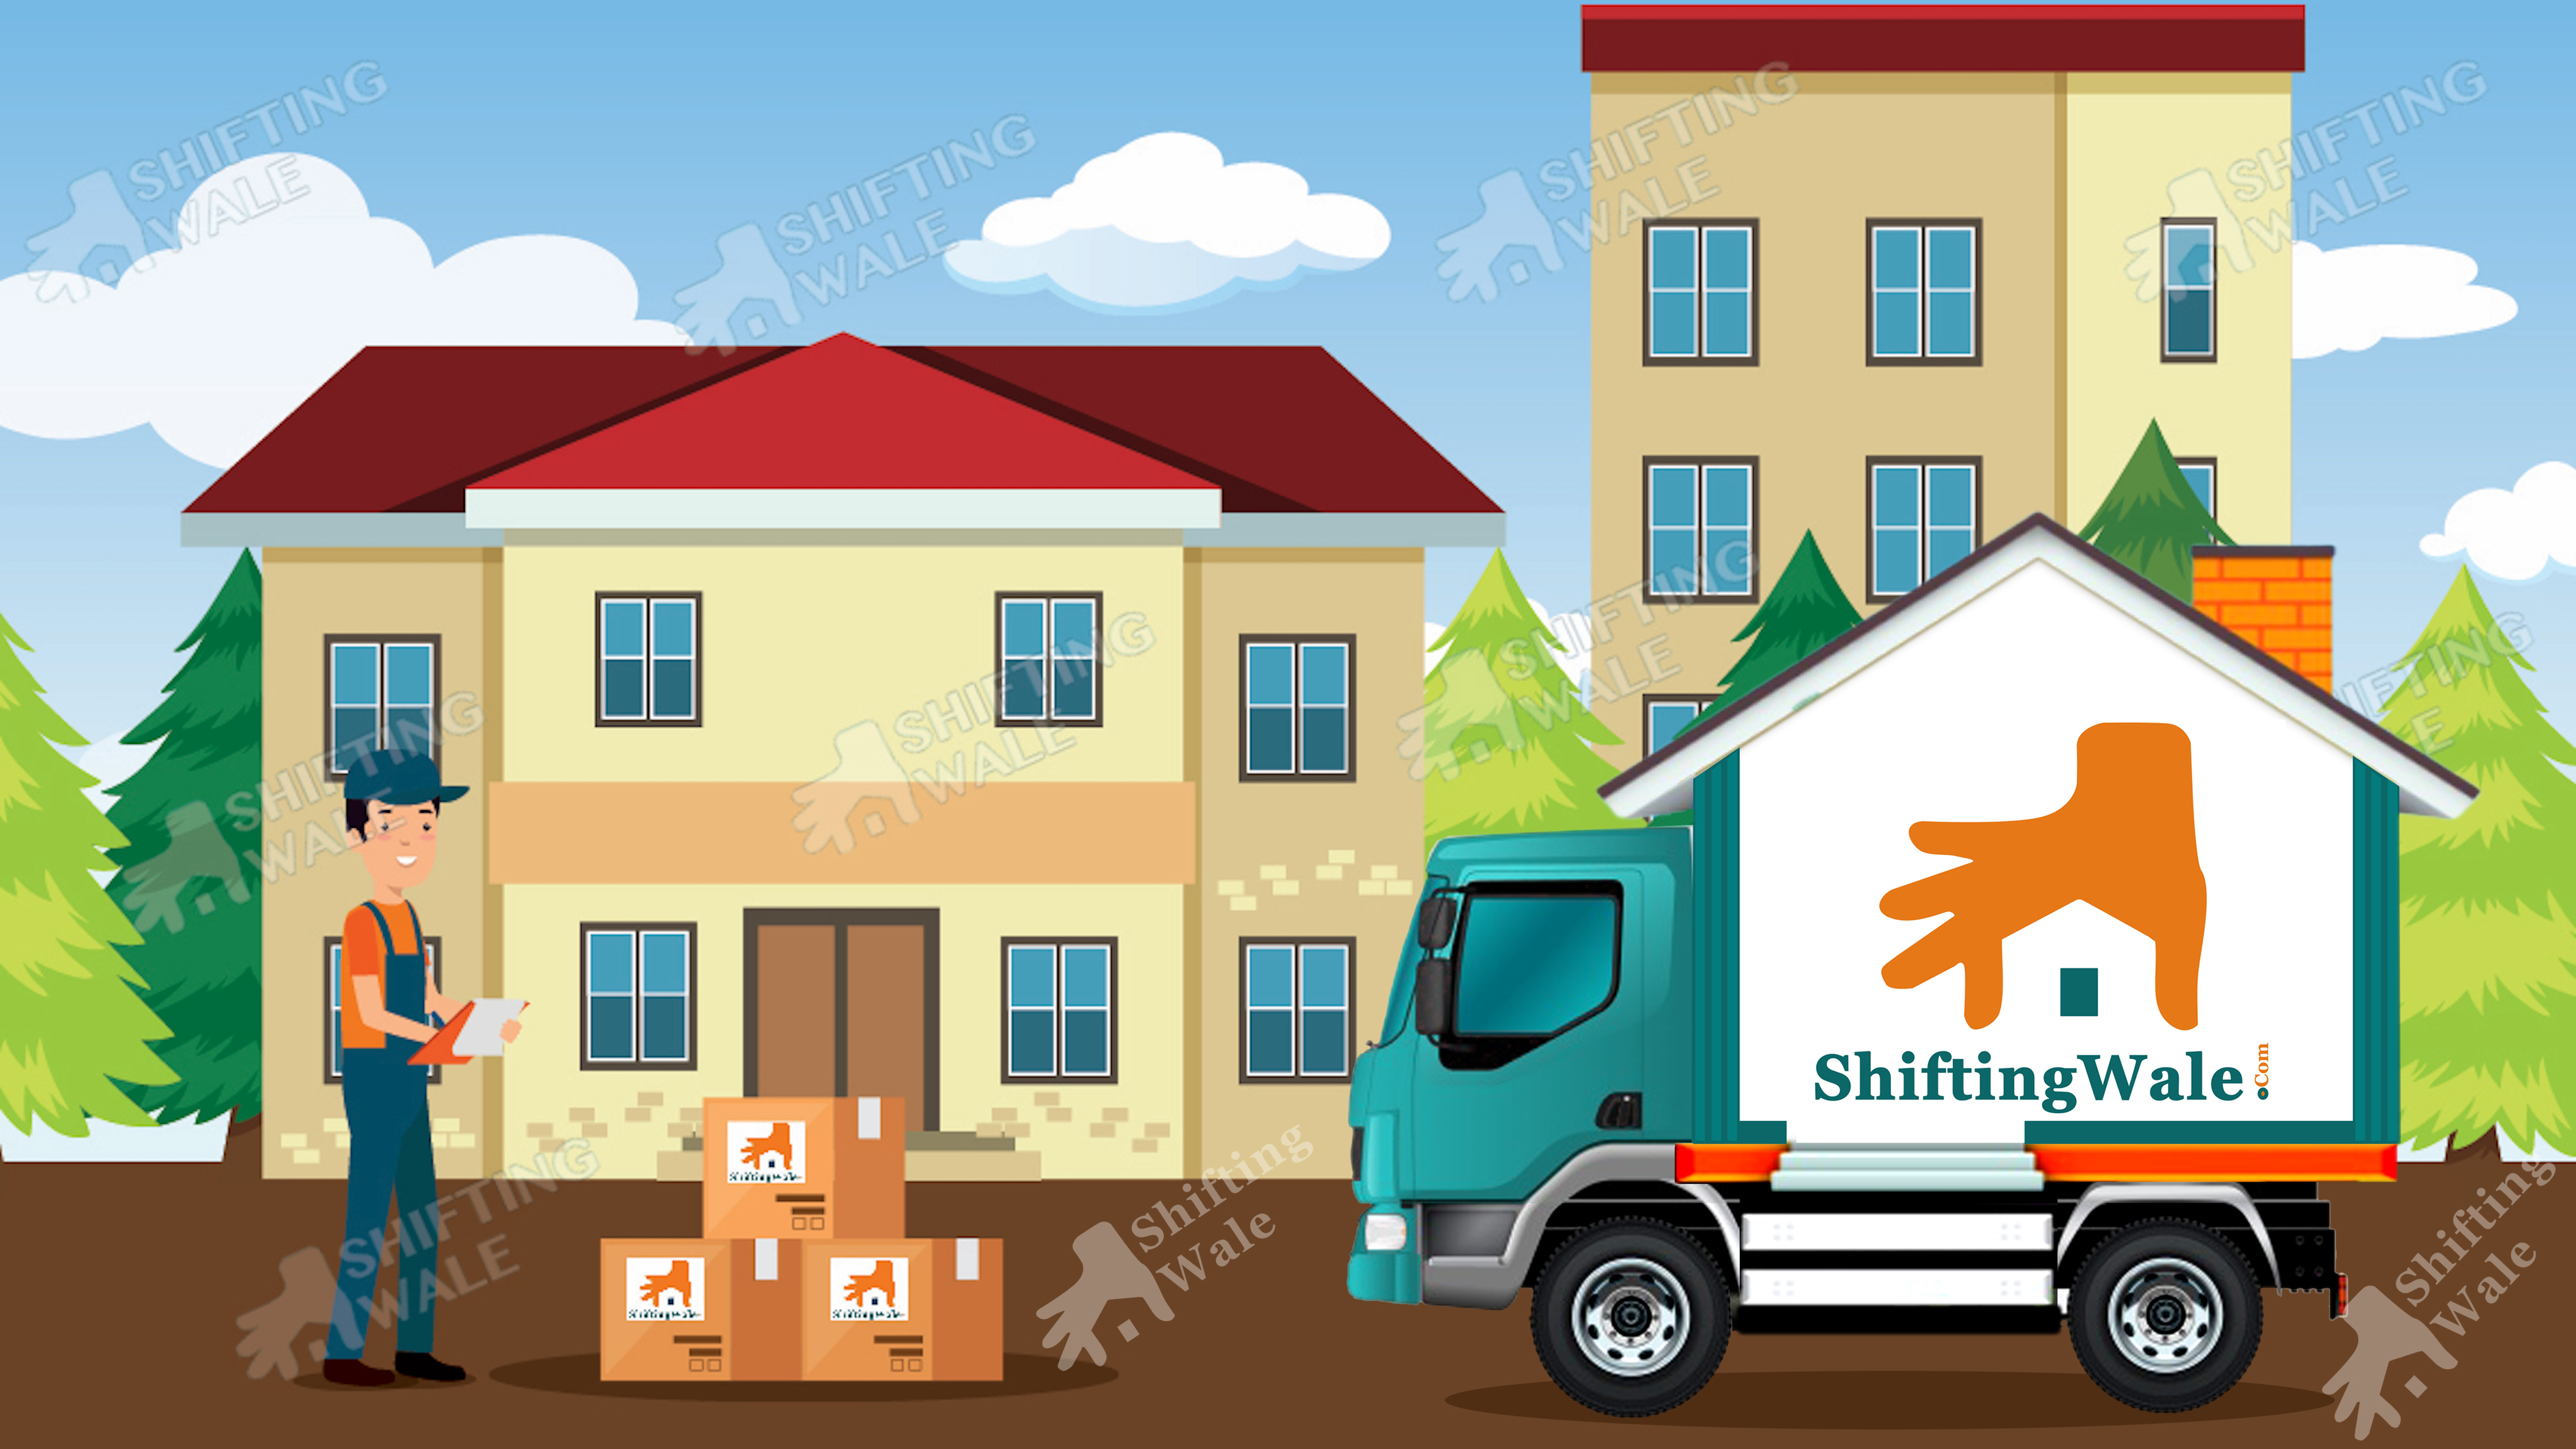 Need Storage Warehousing Services for Household Goods